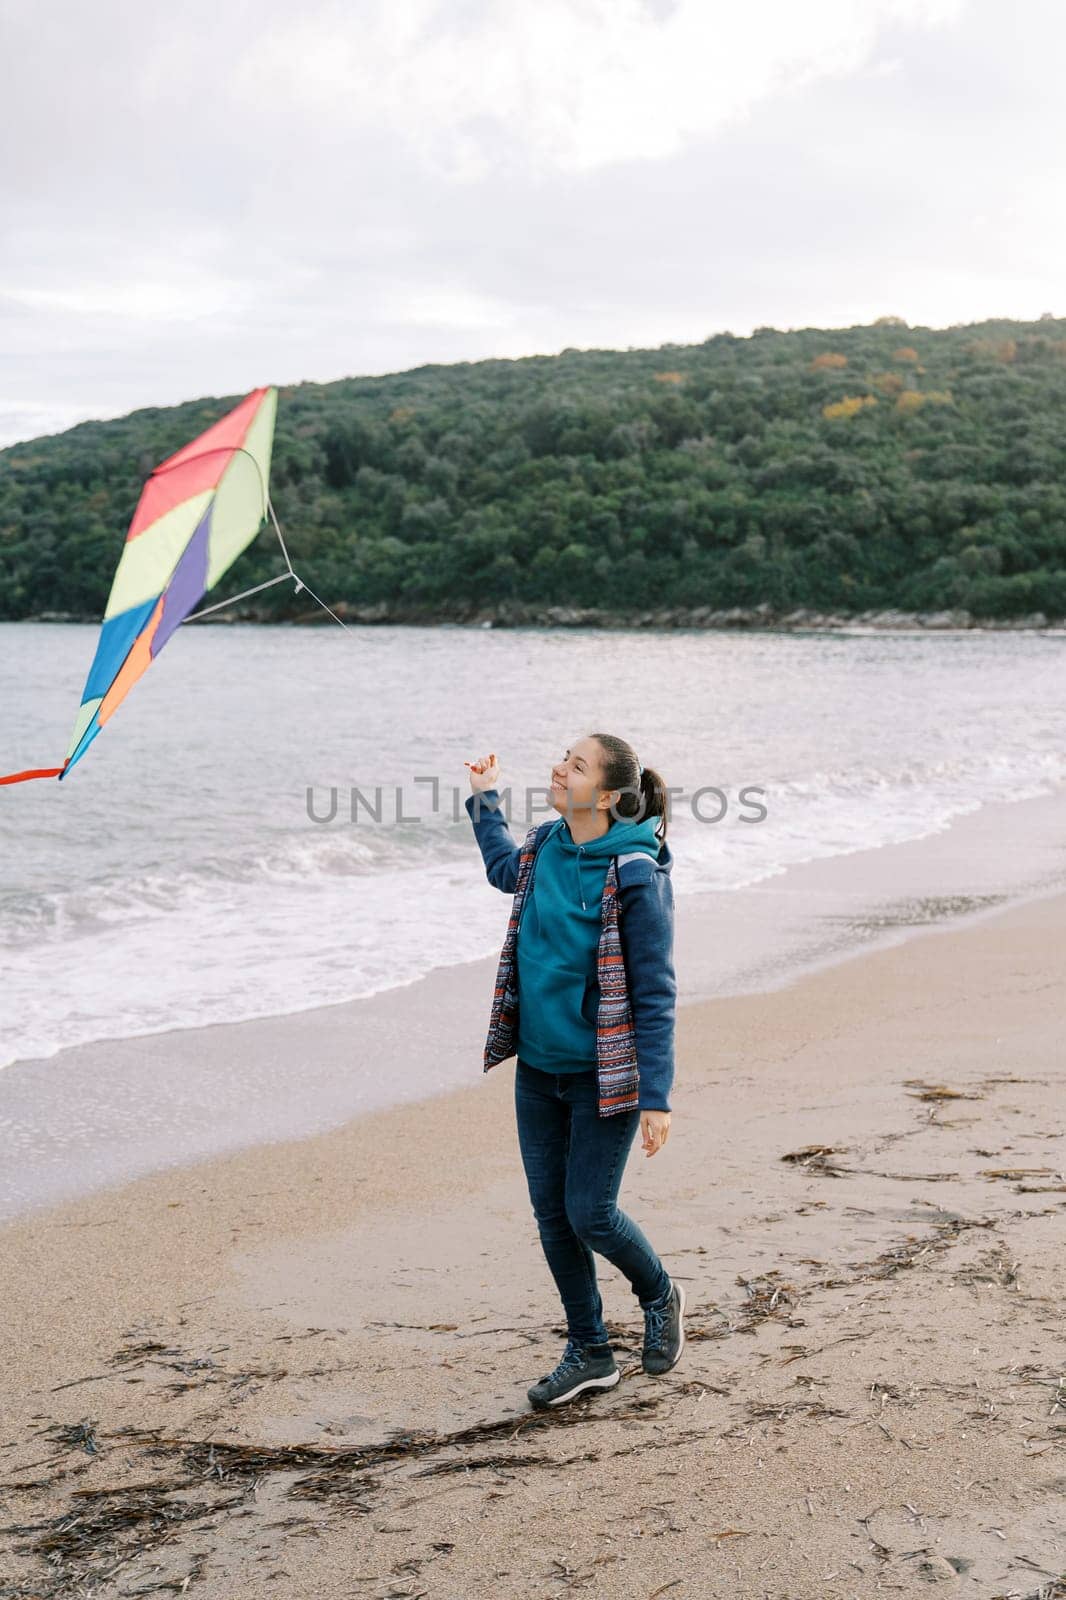 Smiling girl walking along the seashore with a colorful kite on a string. High quality photo